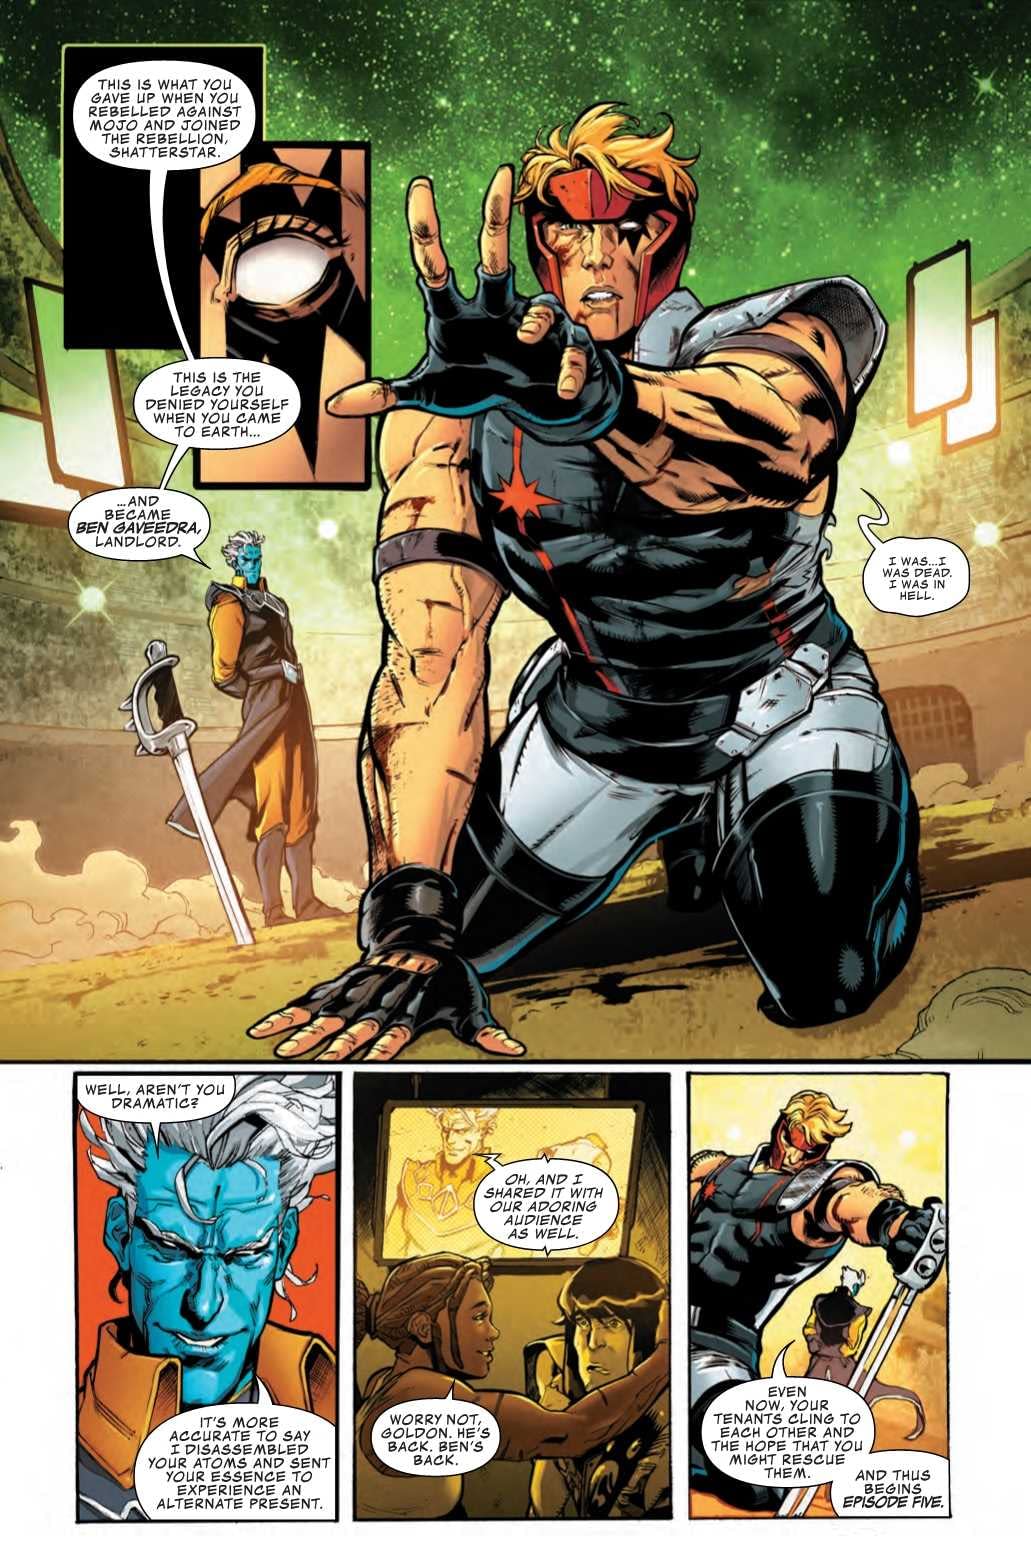 Killing Cable Again in Next Week's Shatterstar #5